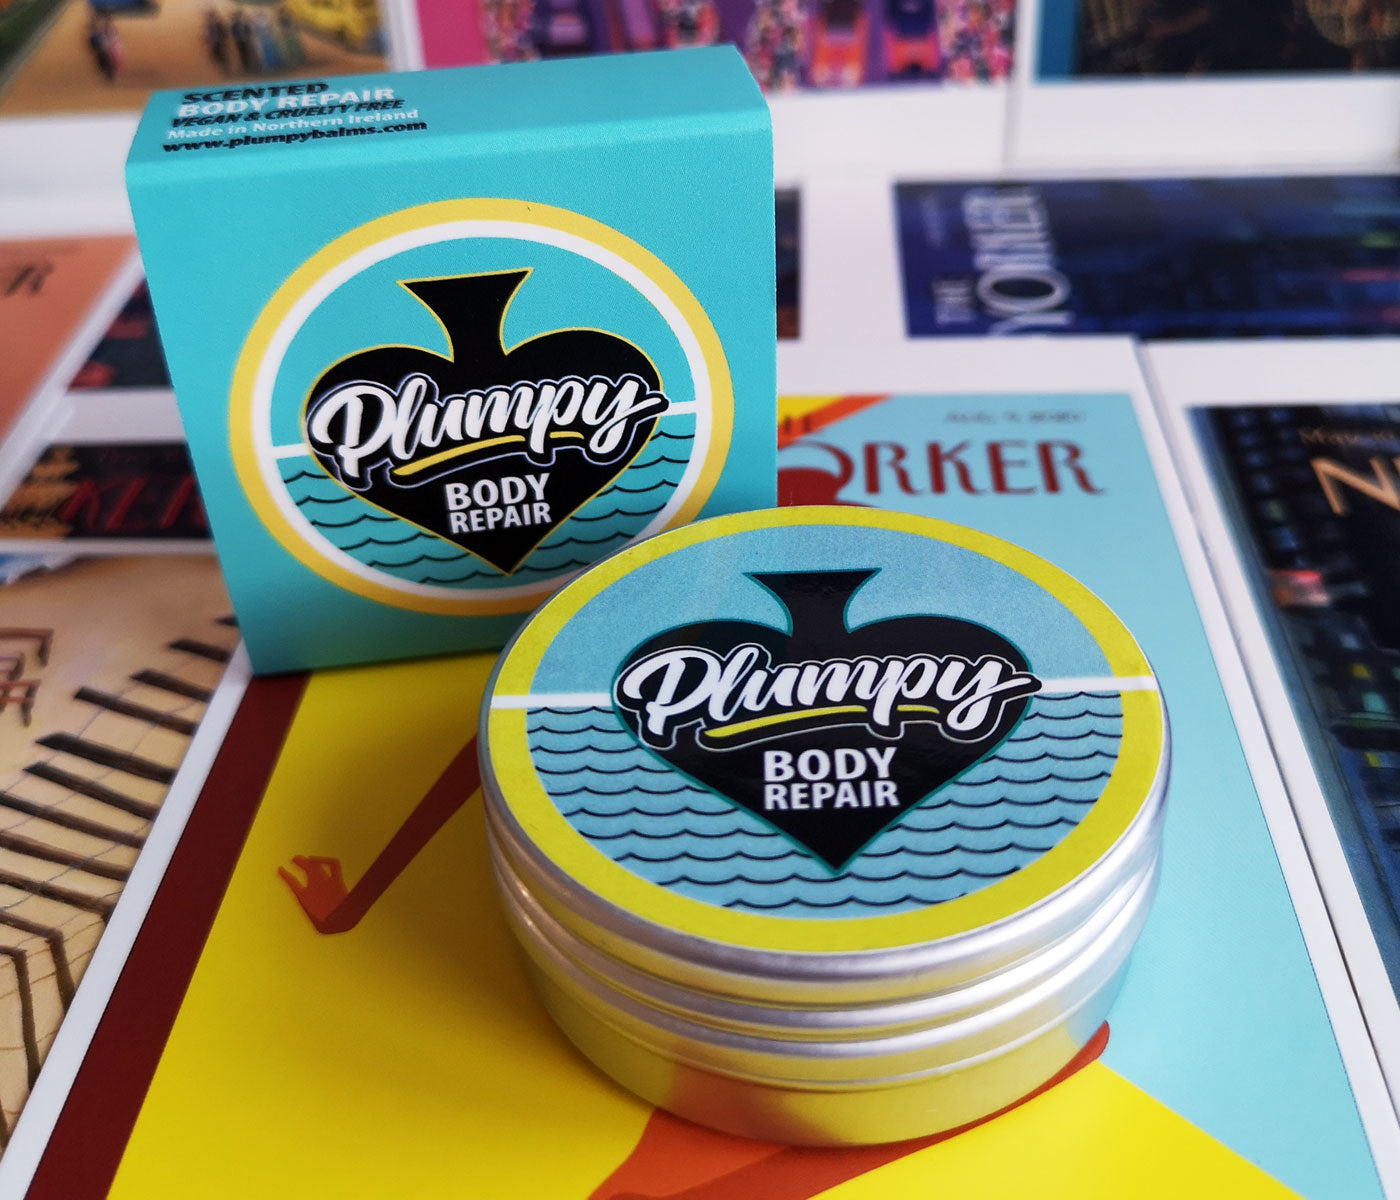 Plumpy Balms body balm for soothing and repairing dry skin feet and elbow balm